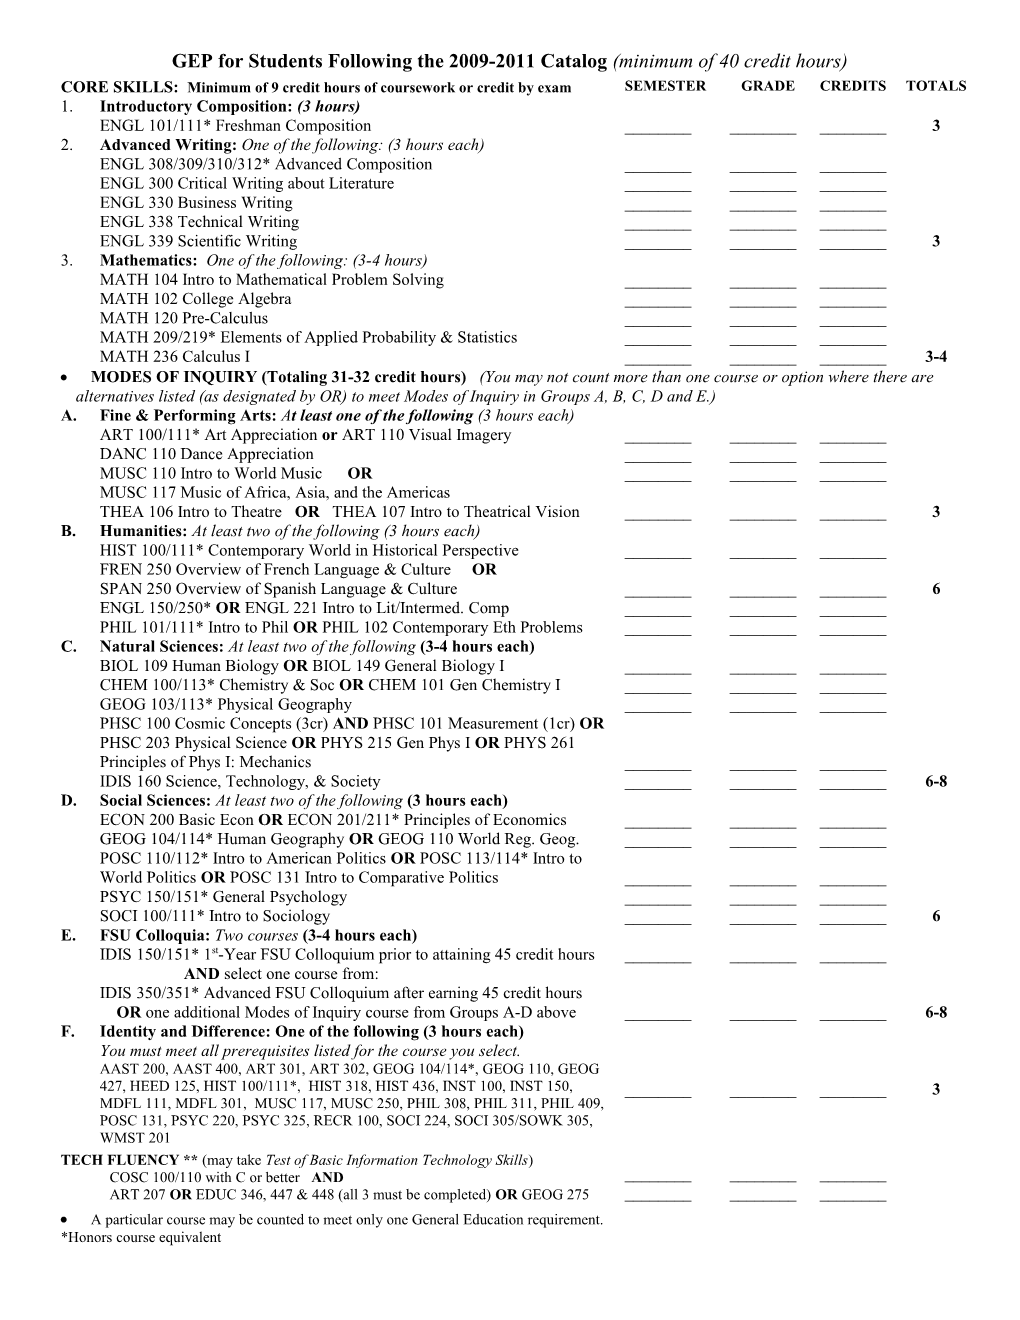 Requirements for Students Following the 2001-2003 Catalogs